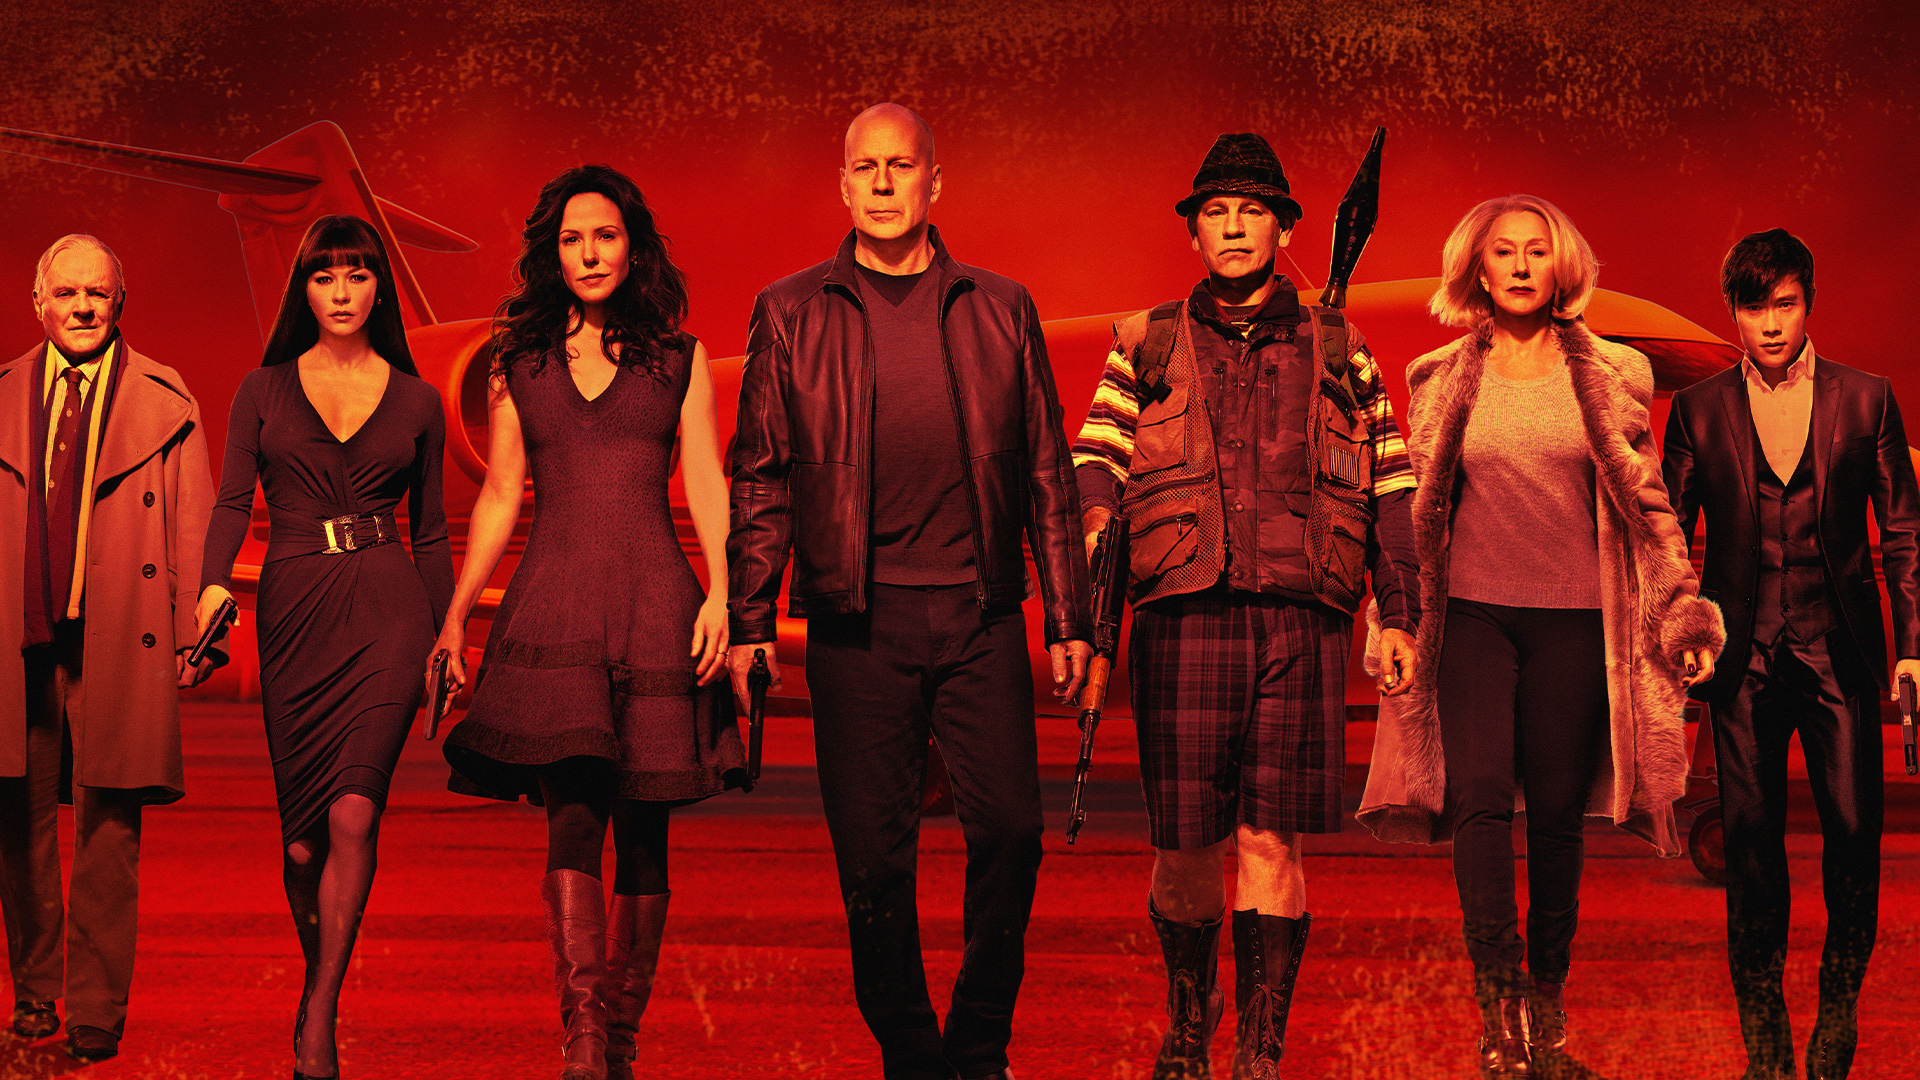 Movie RED 2 HD Wallpaper | Background Image